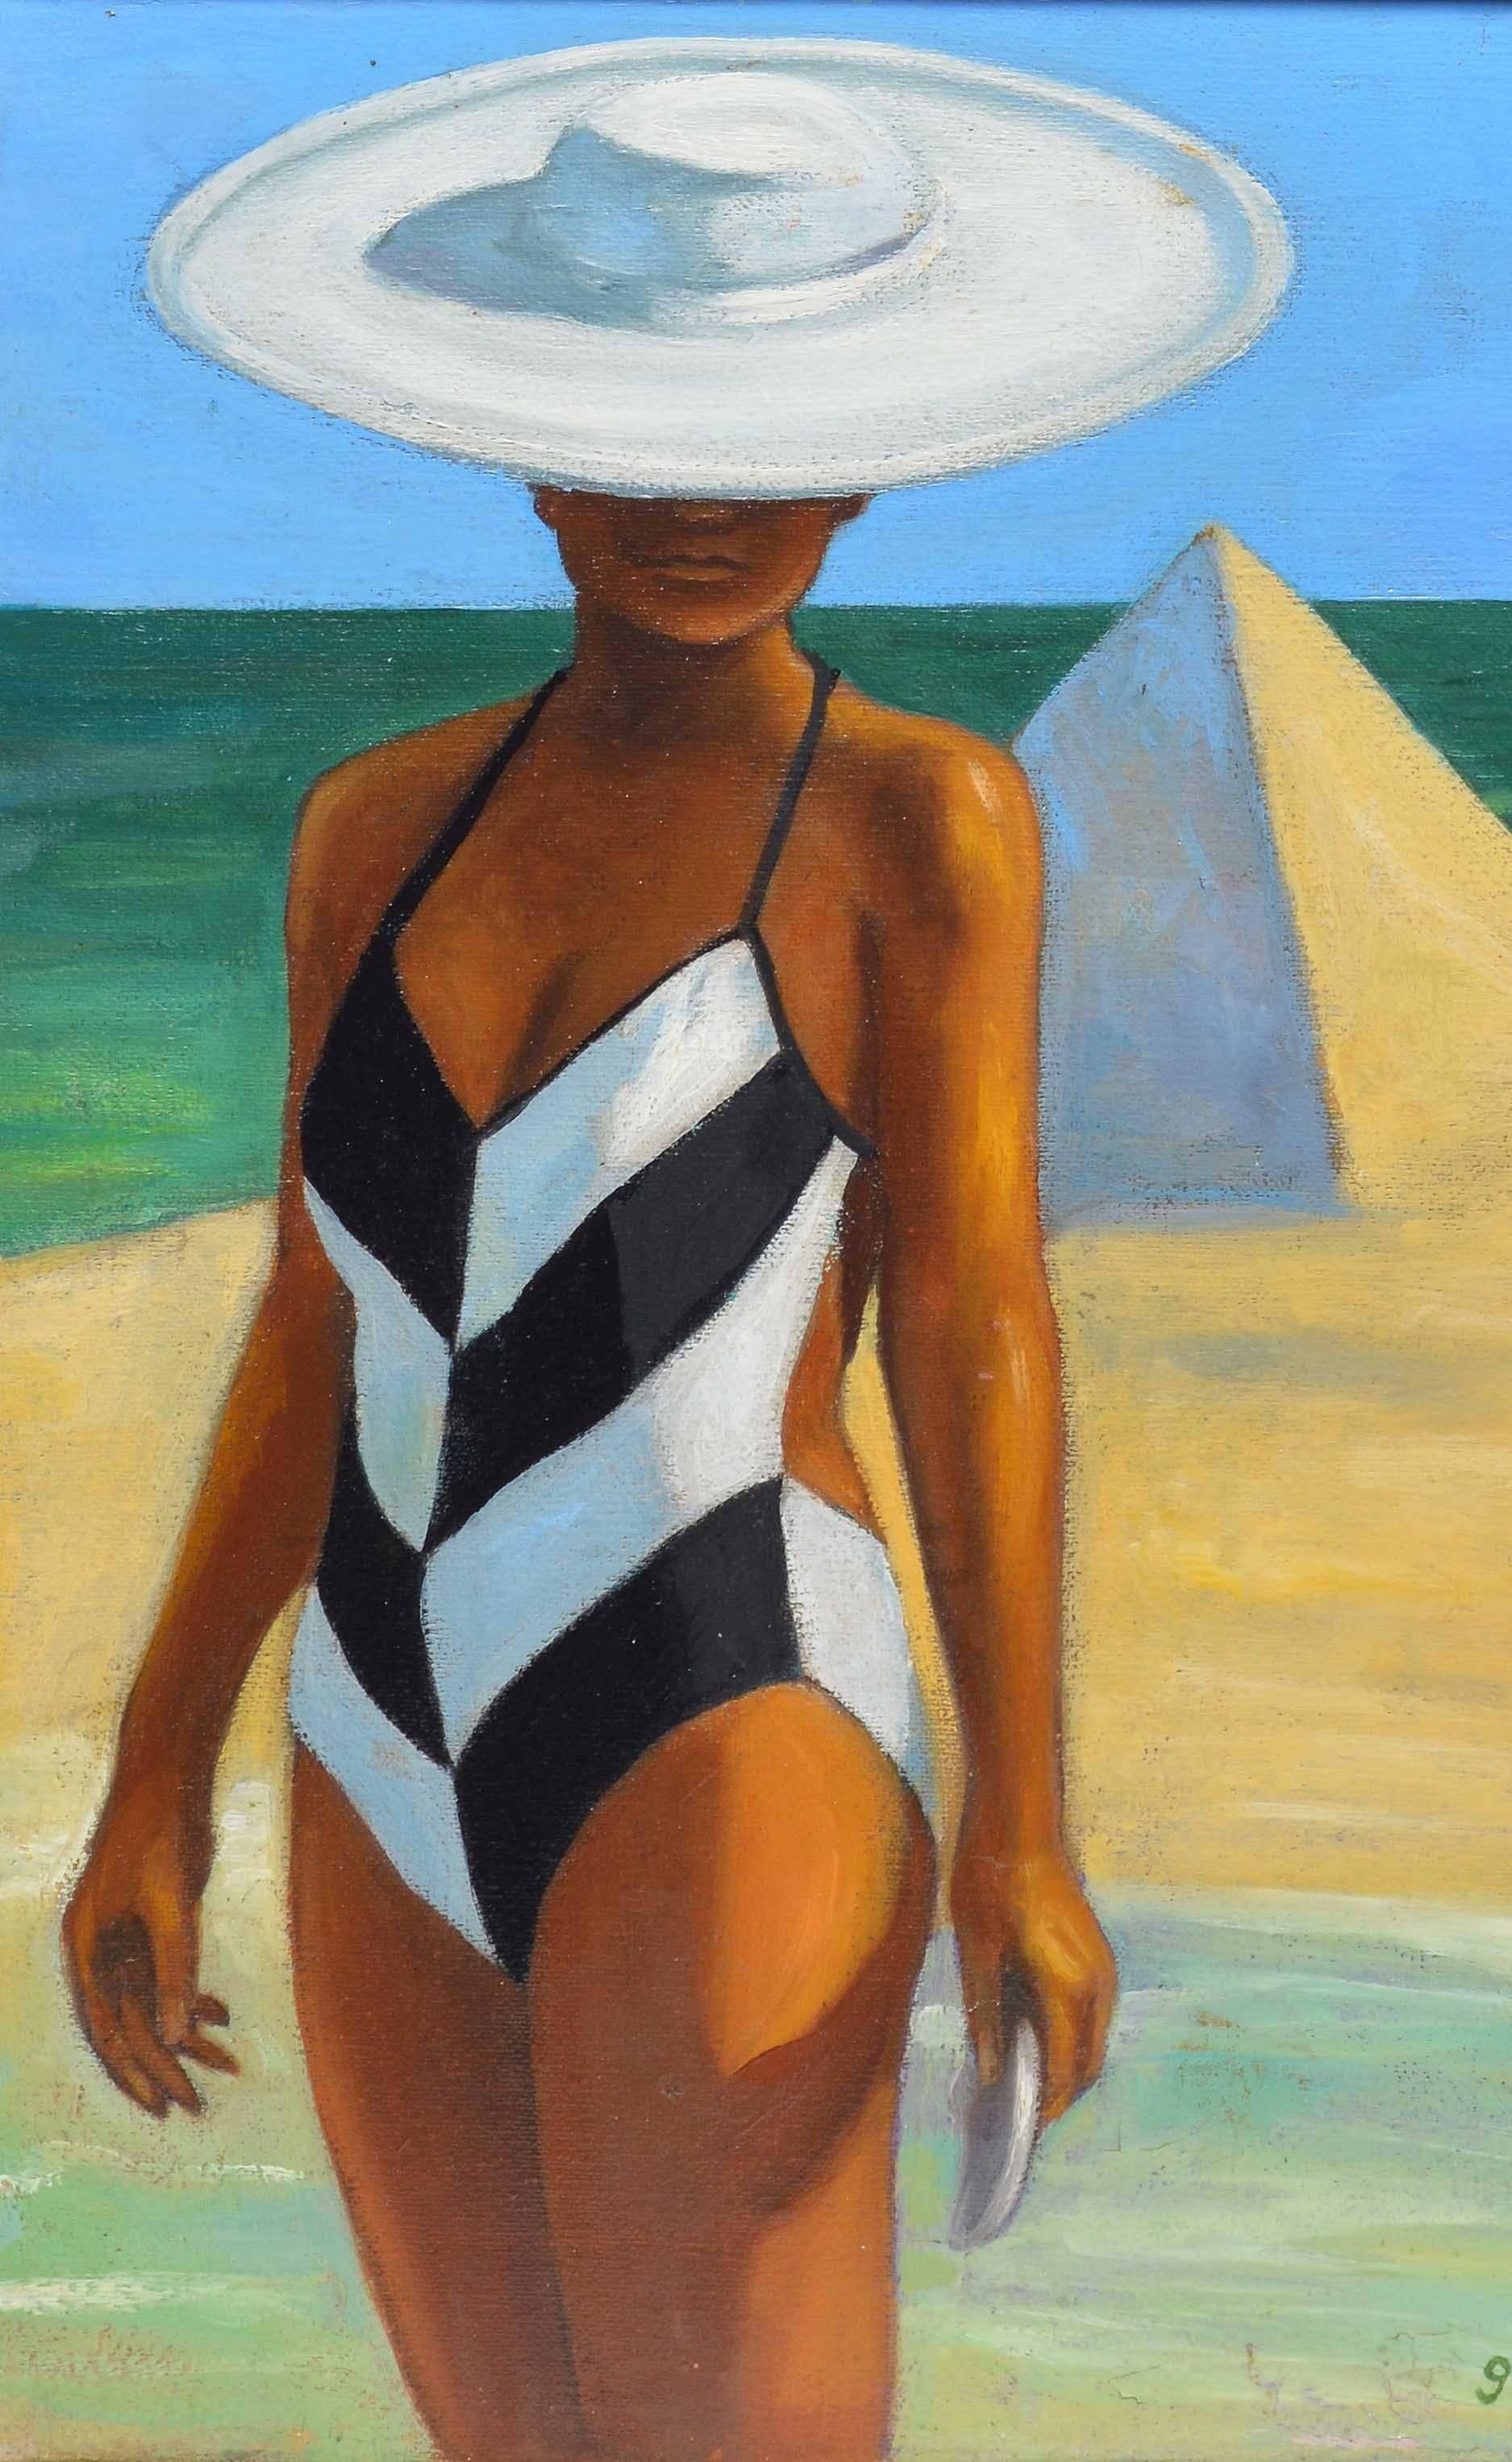 Surreal Beach View  - Brown Figurative Painting by Gordon Tomei